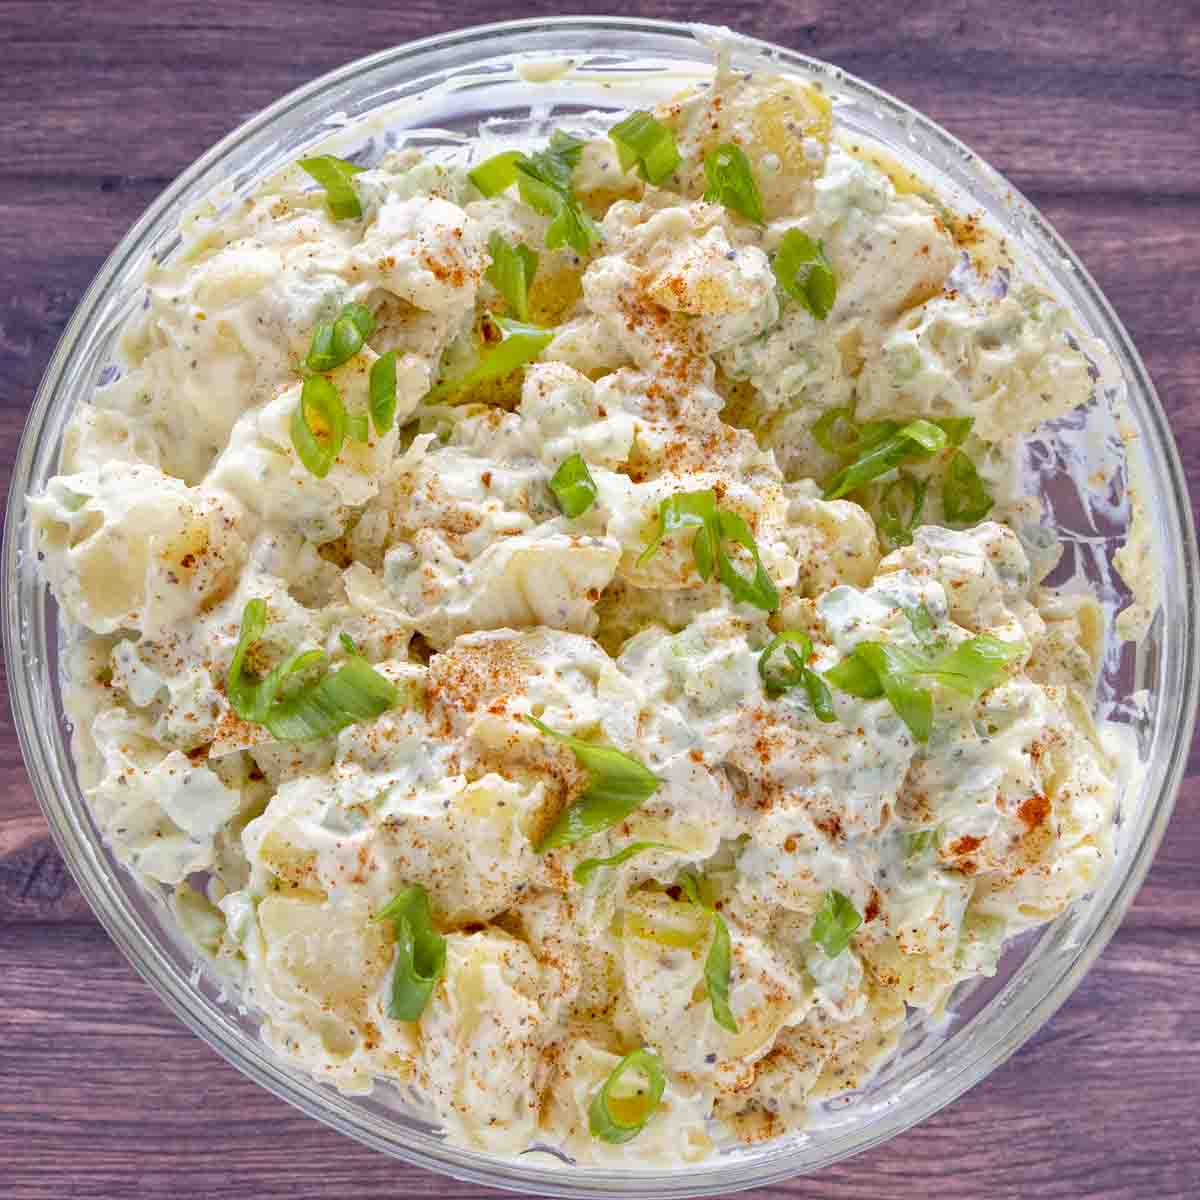 potato salad in a large glass bowl.